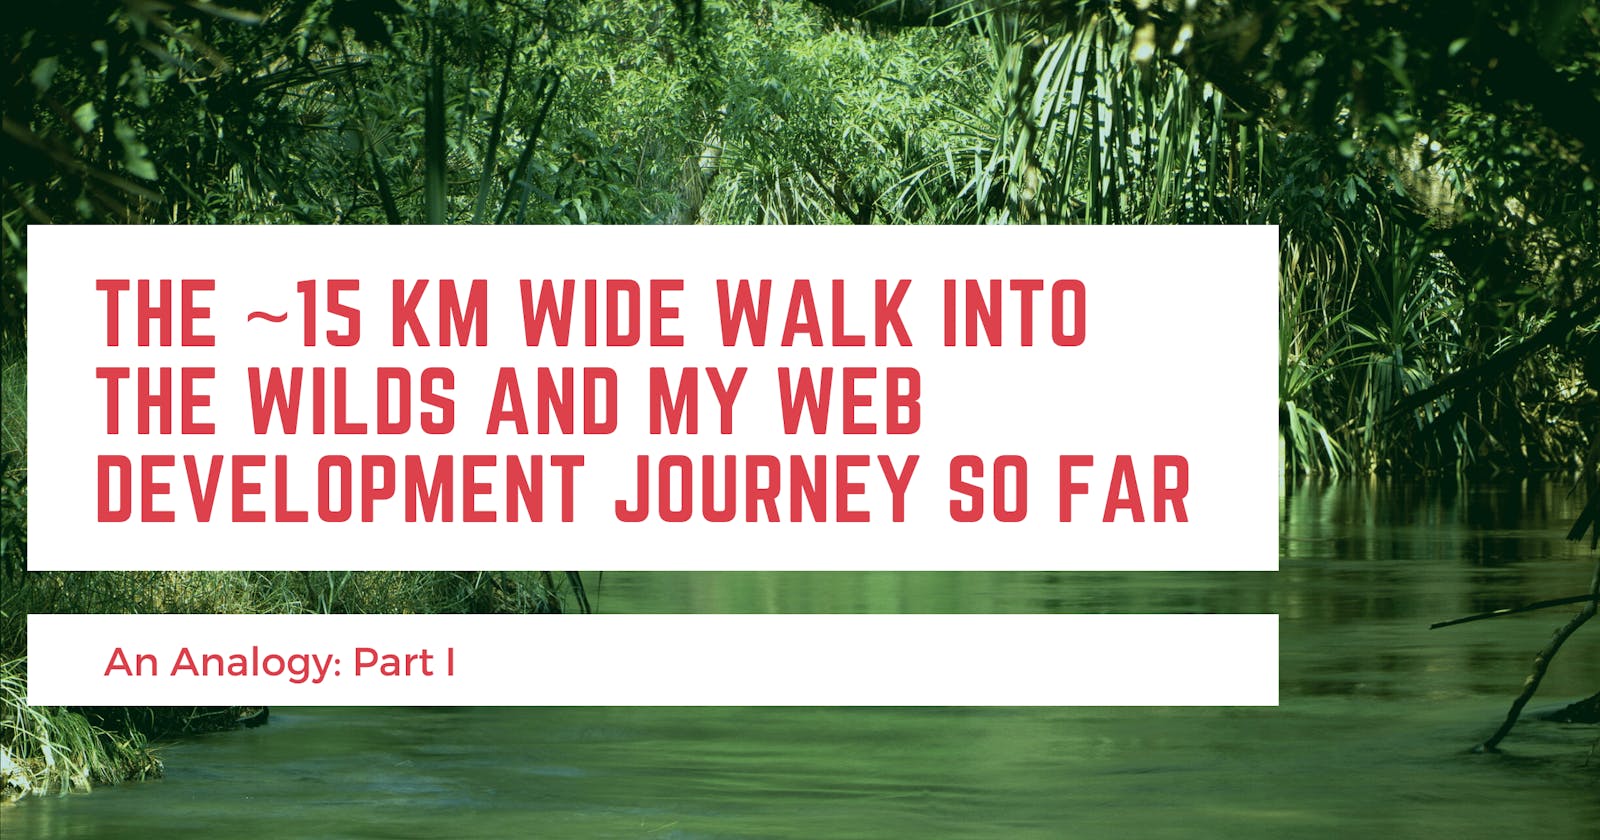 The ~15 km wide walk into the wilds and my Web development journey so far: An Analogy